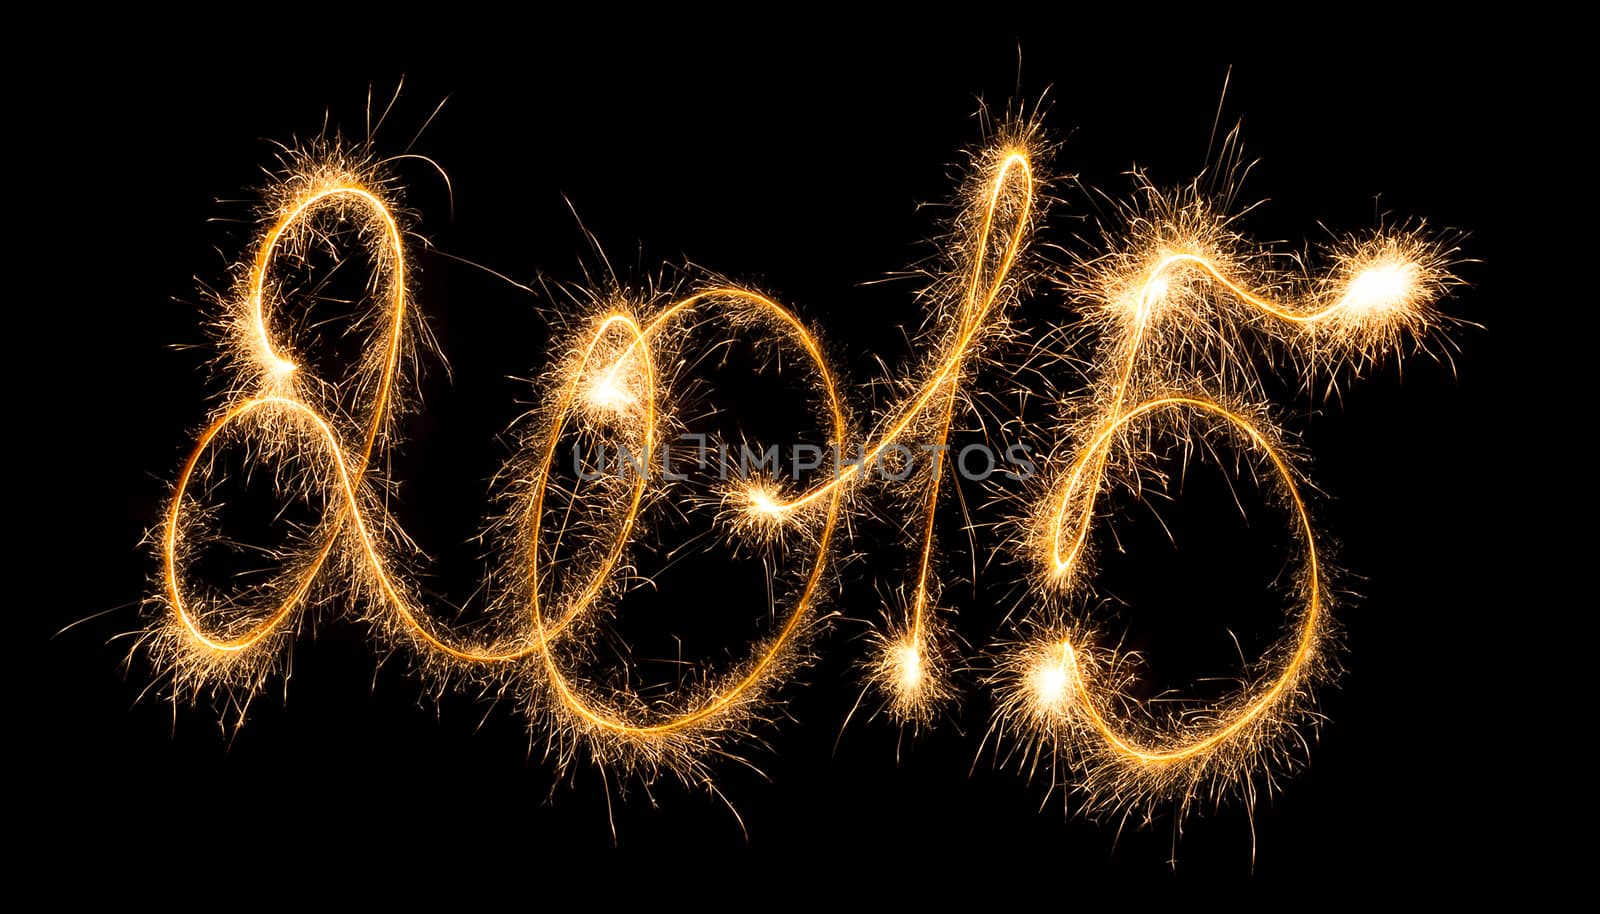 Happy New Year - 2015 with sparklers by vlad_star